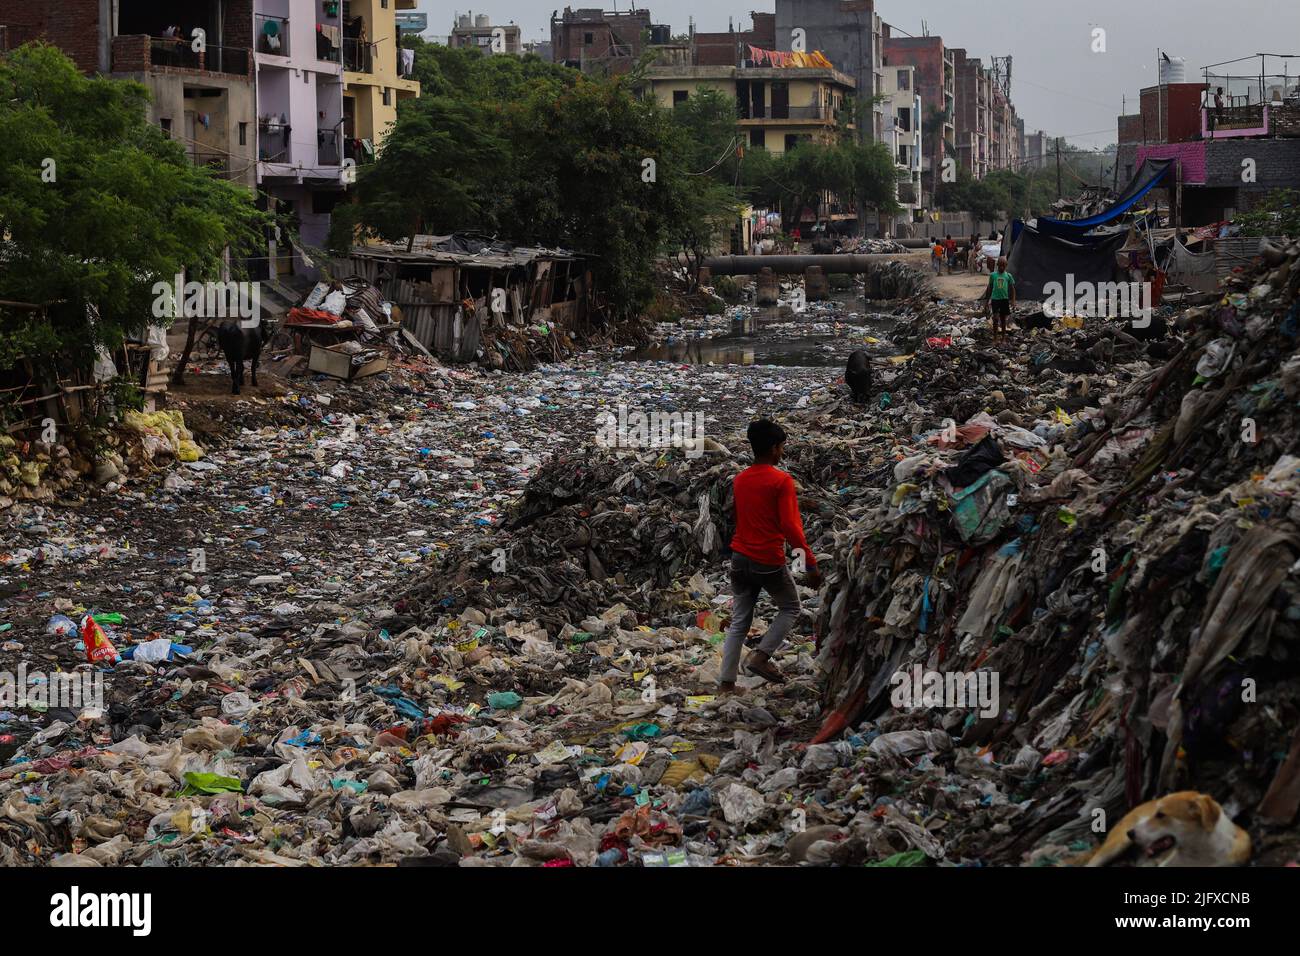 View of an open dump area filled with plastic and garbage at a slum area in New Delhi. In order to prevent its harmful effects on the environment and in pursuance of its global climate goals, India will ban the use of single-use plastics from July 1st 2022. Stock Photo